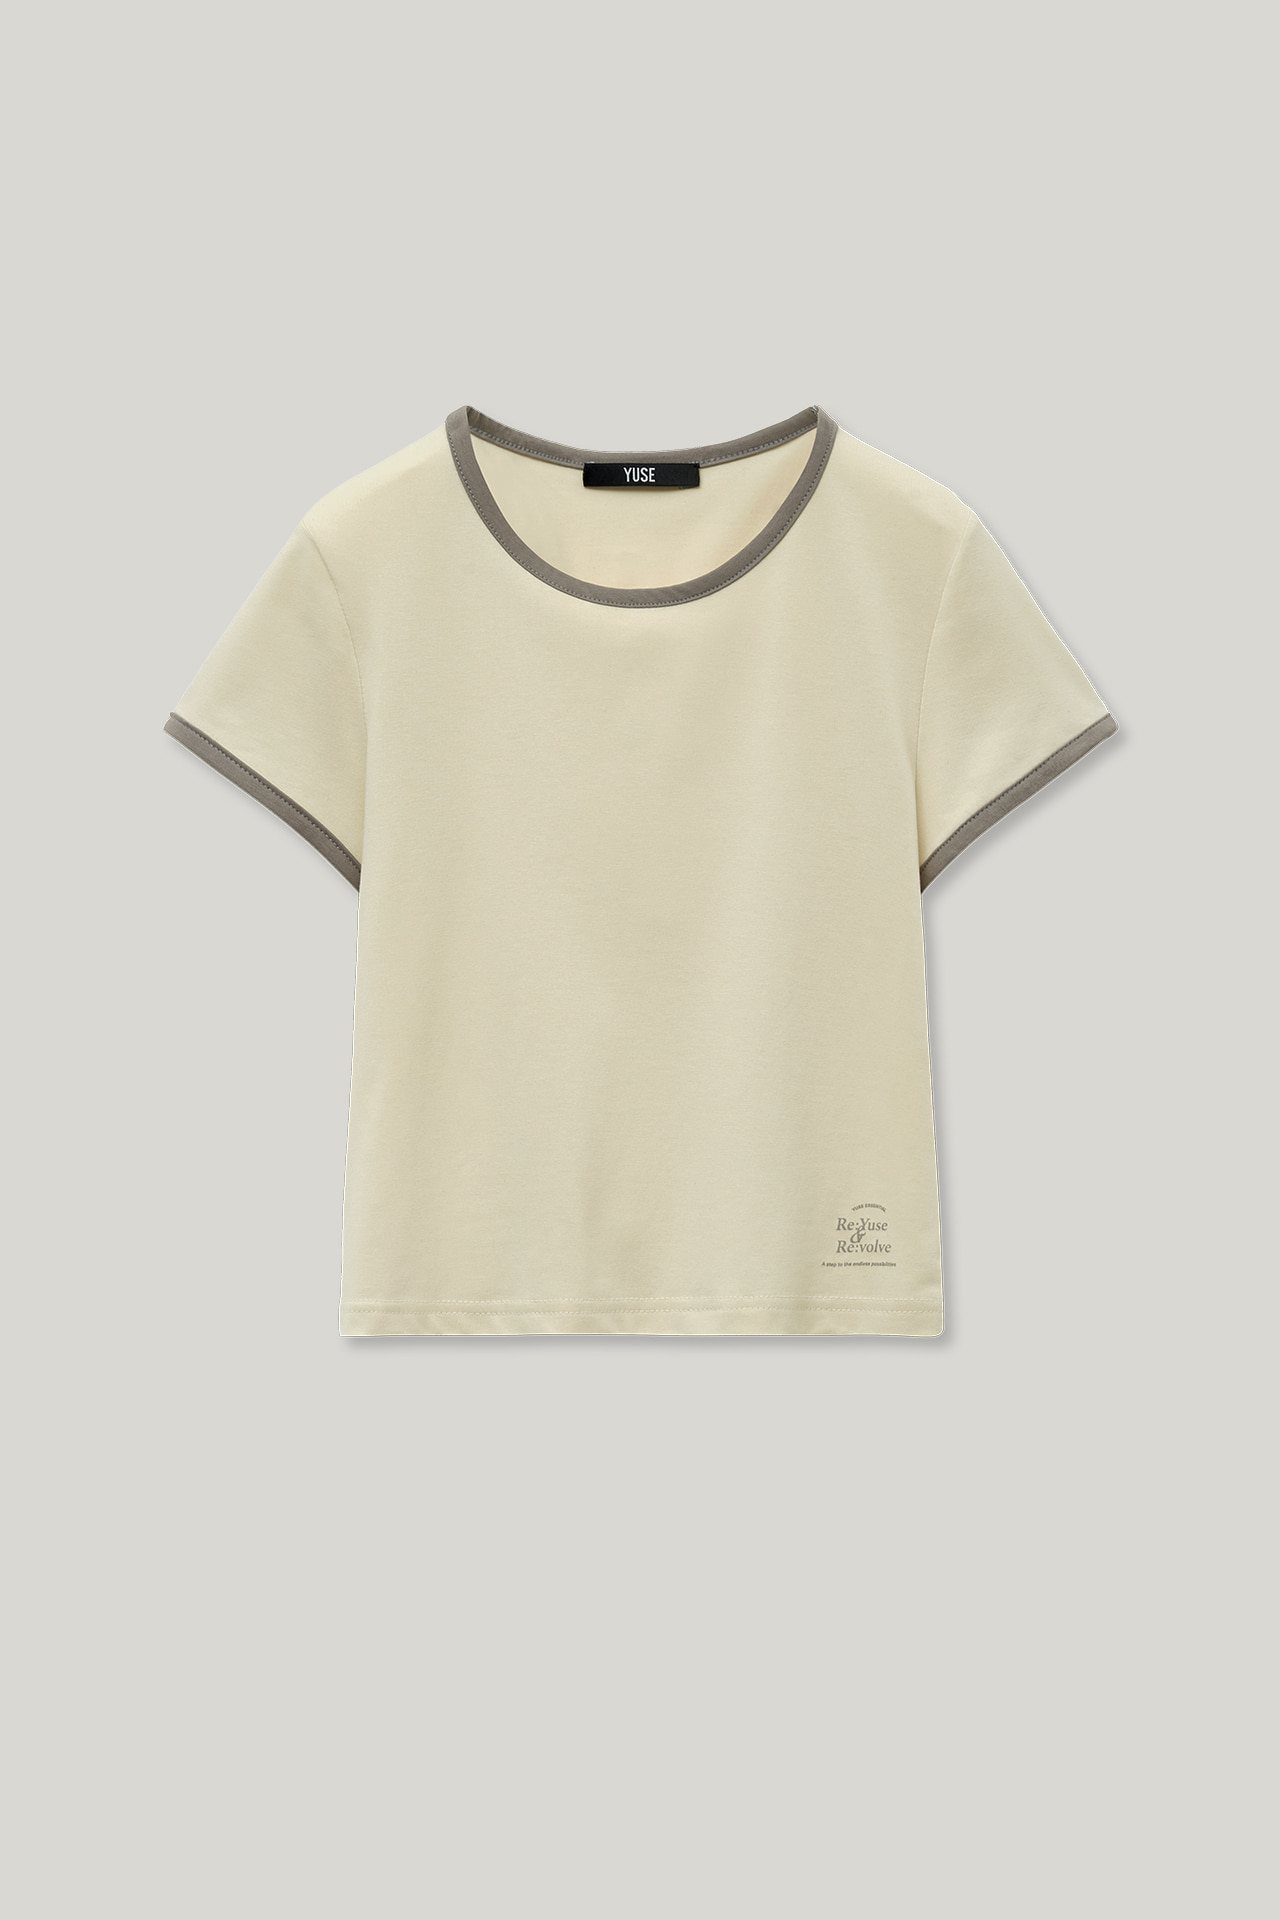 [RE:YUSE] BASIC RECYCLE COLOR POINT CROP T-SHIRT - LIGHT YELLOW (4/15일 예약배송)